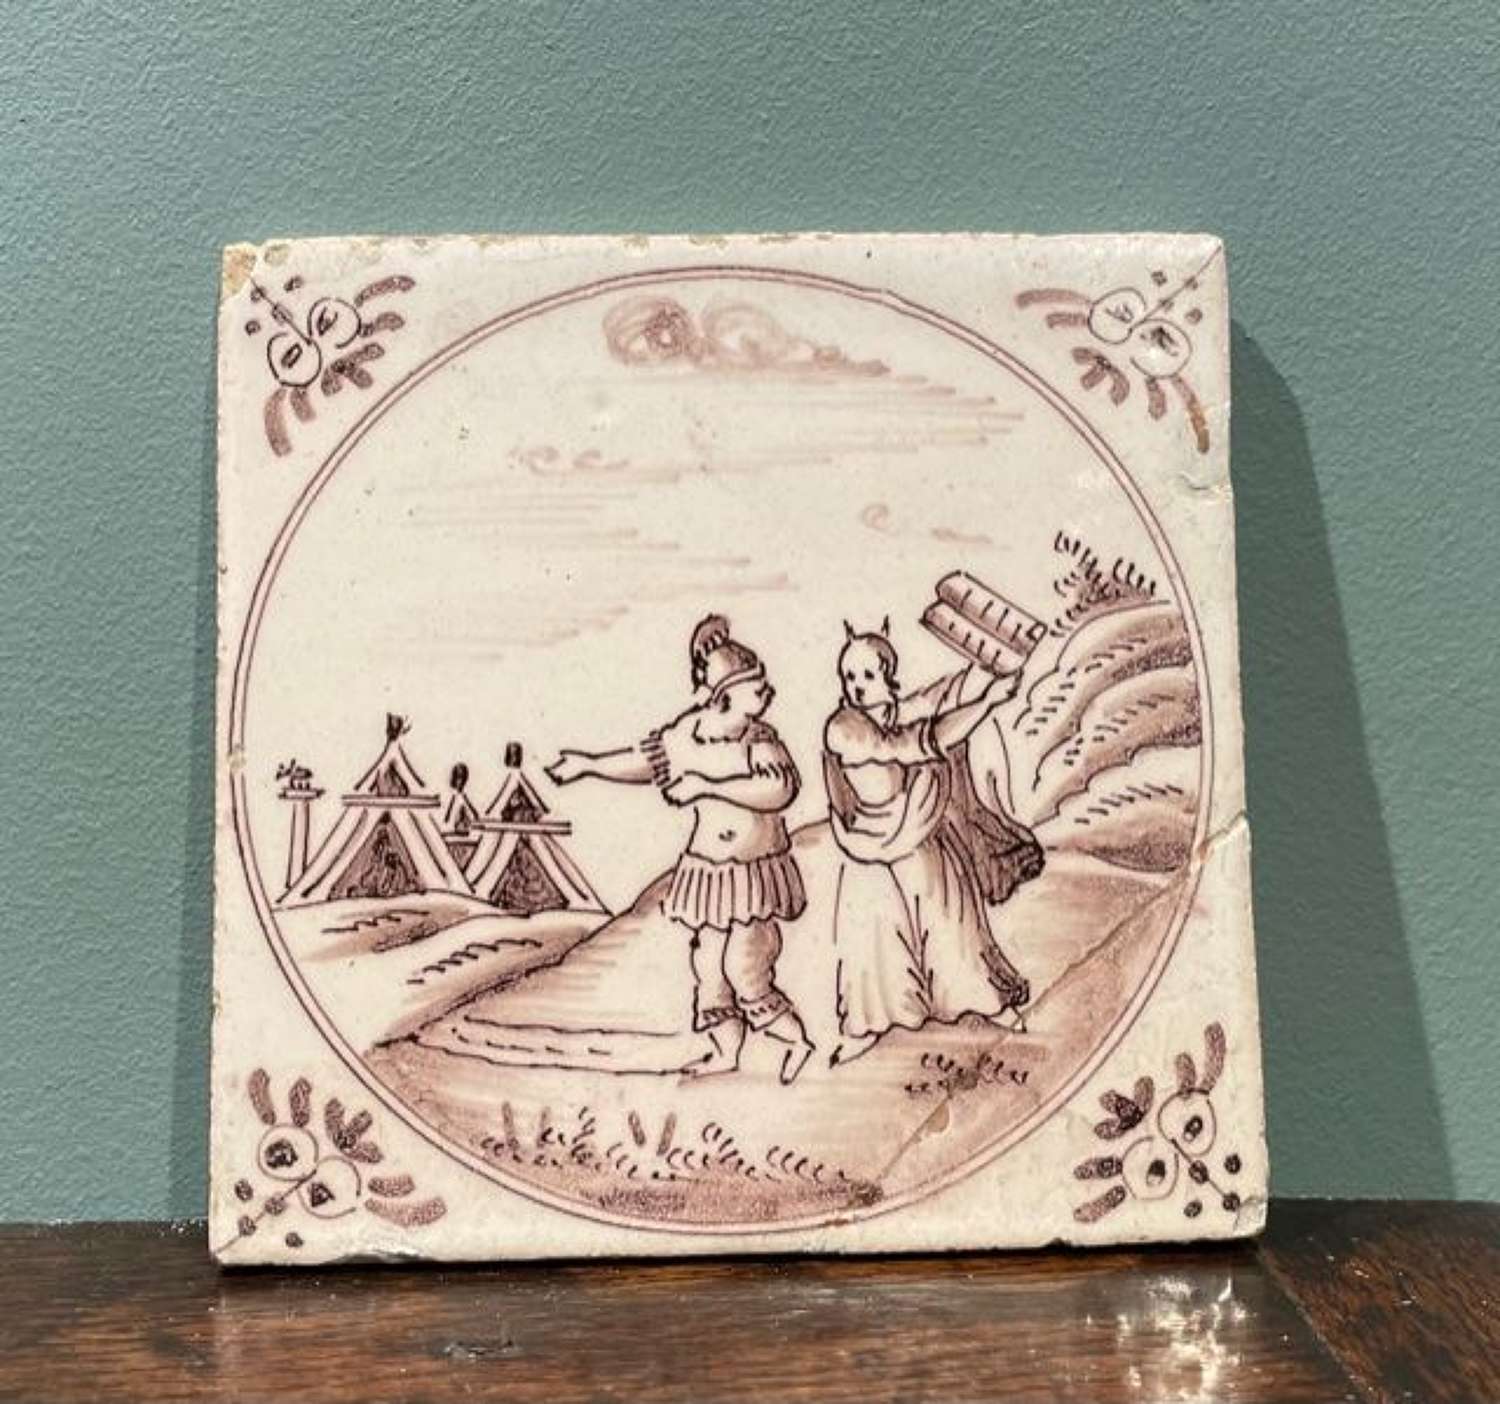 Mid 18th c. Dutch Delft manganese tile - 'Moses'